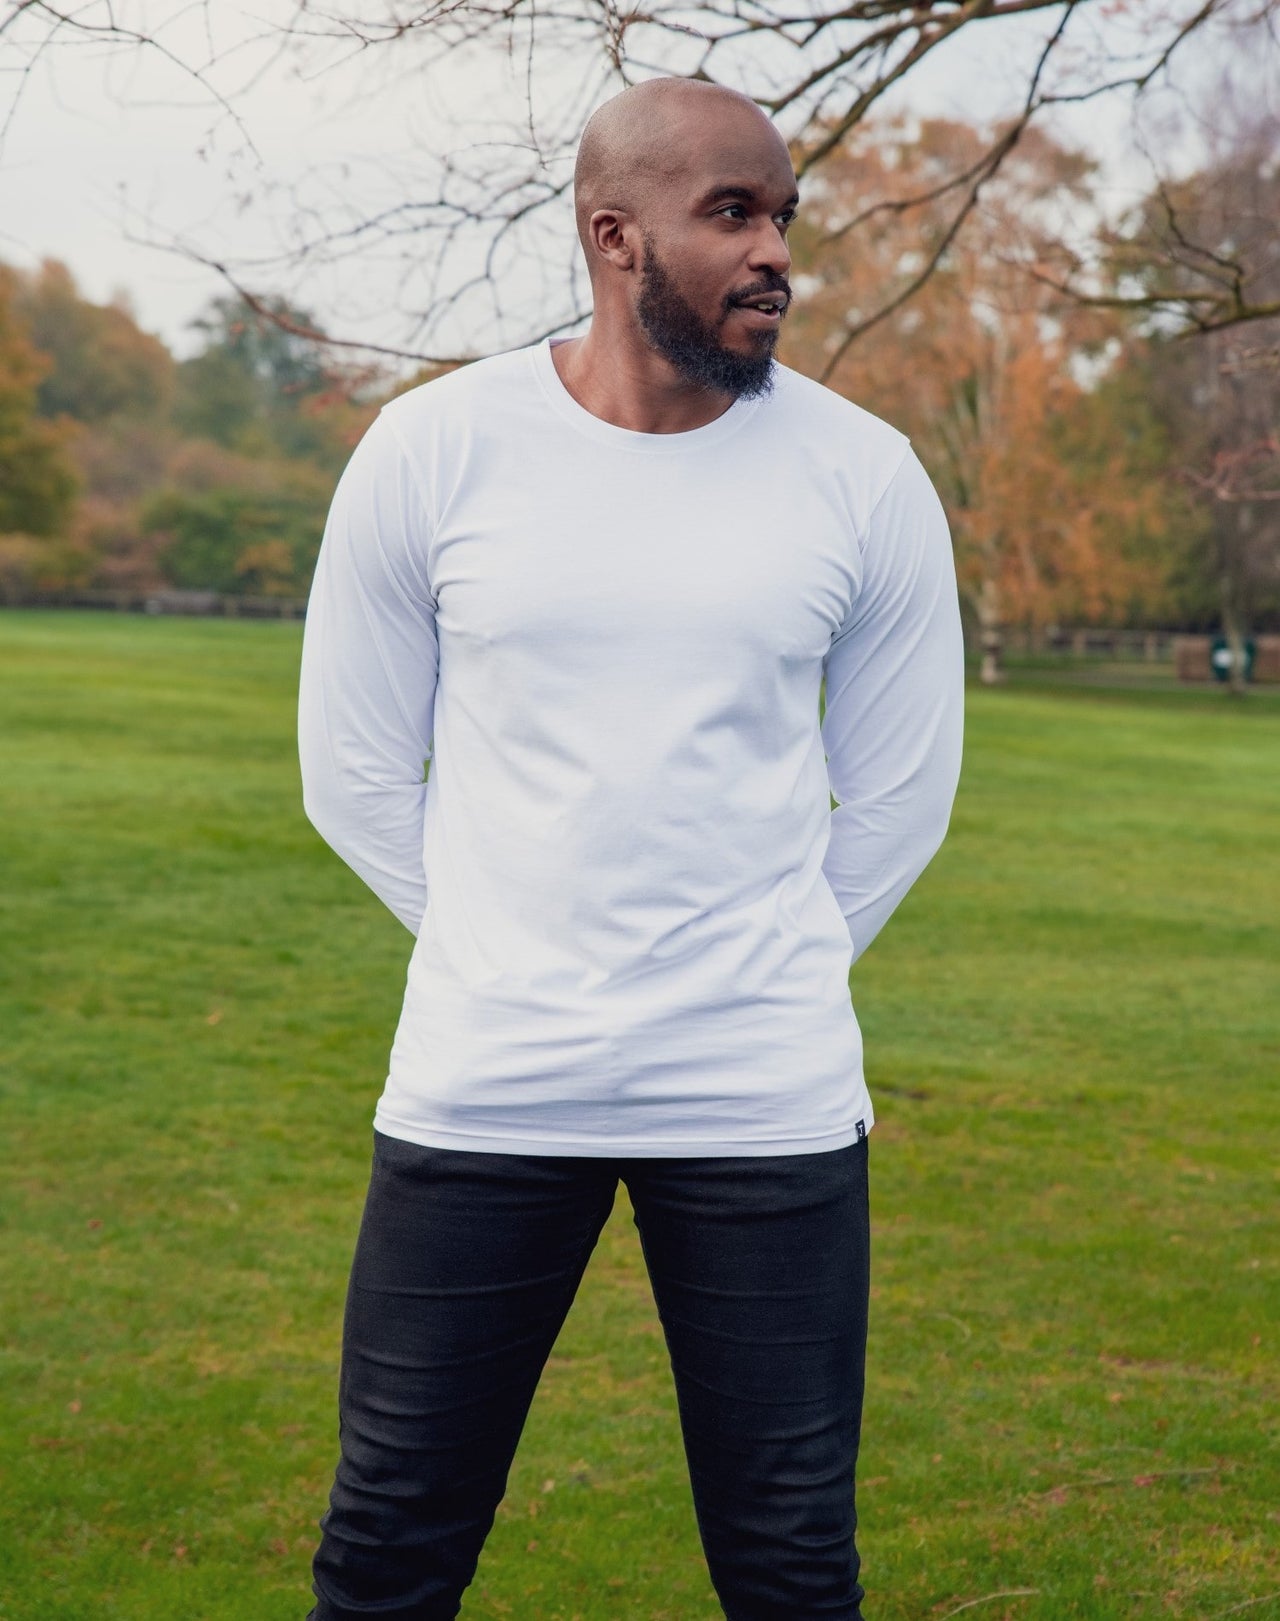 A tall athletic guy wearing a long sleeve white tall t-shirt and smiling in a park with hands behind back.